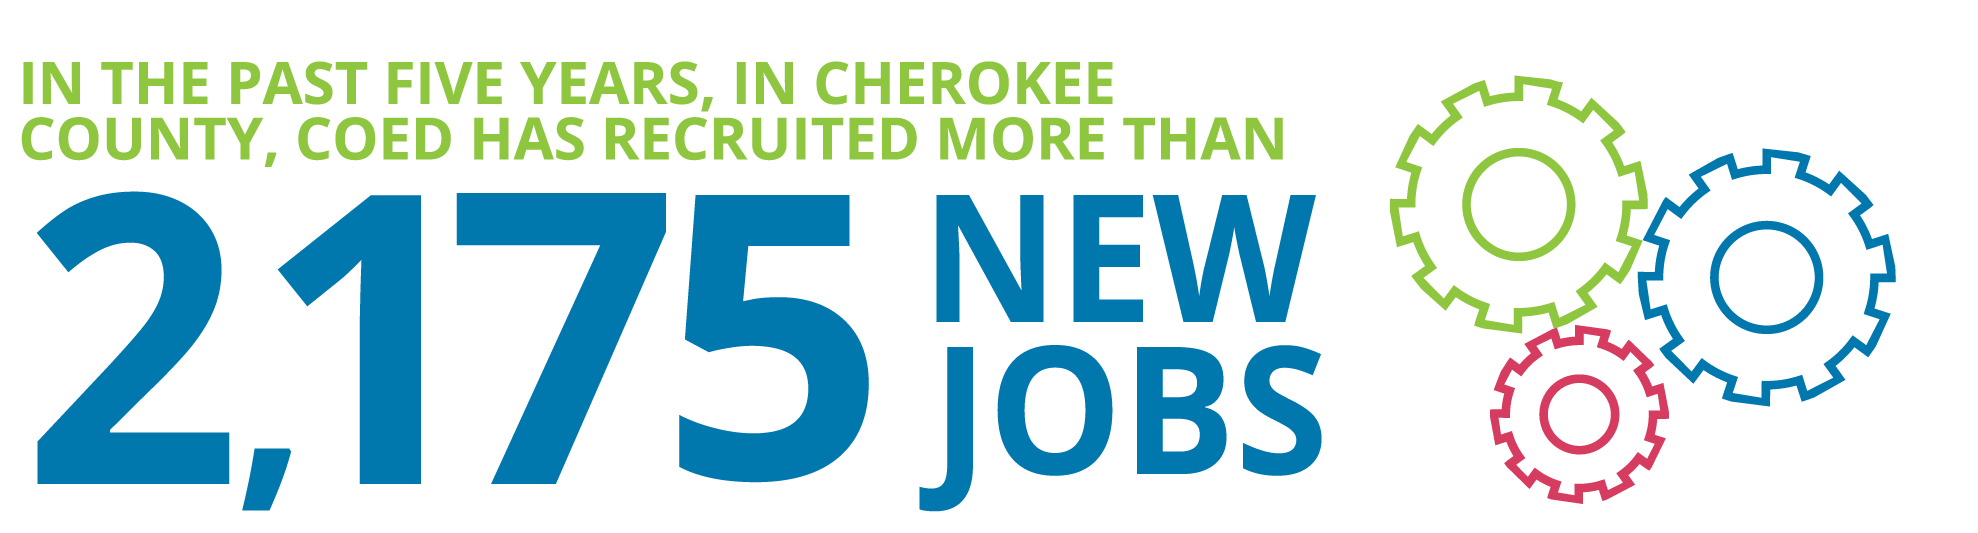 Cherokee Office of Economic Development has recruited 2,175 new jobs in the past five years for Cherokee County